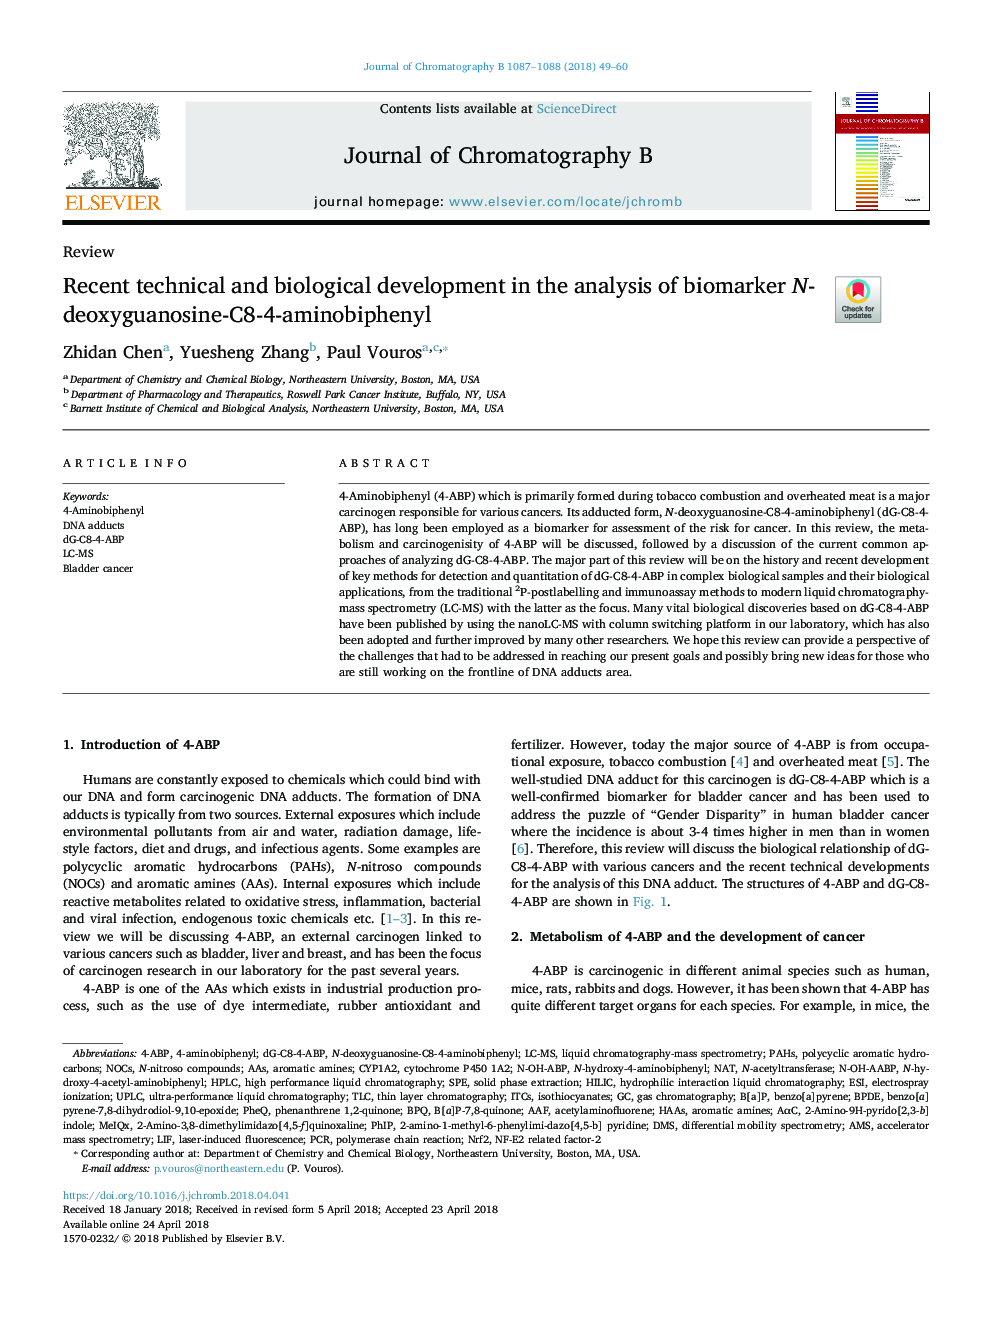 Recent technical and biological development in the analysis of biomarker N-deoxyguanosine-C8-4-aminobiphenyl